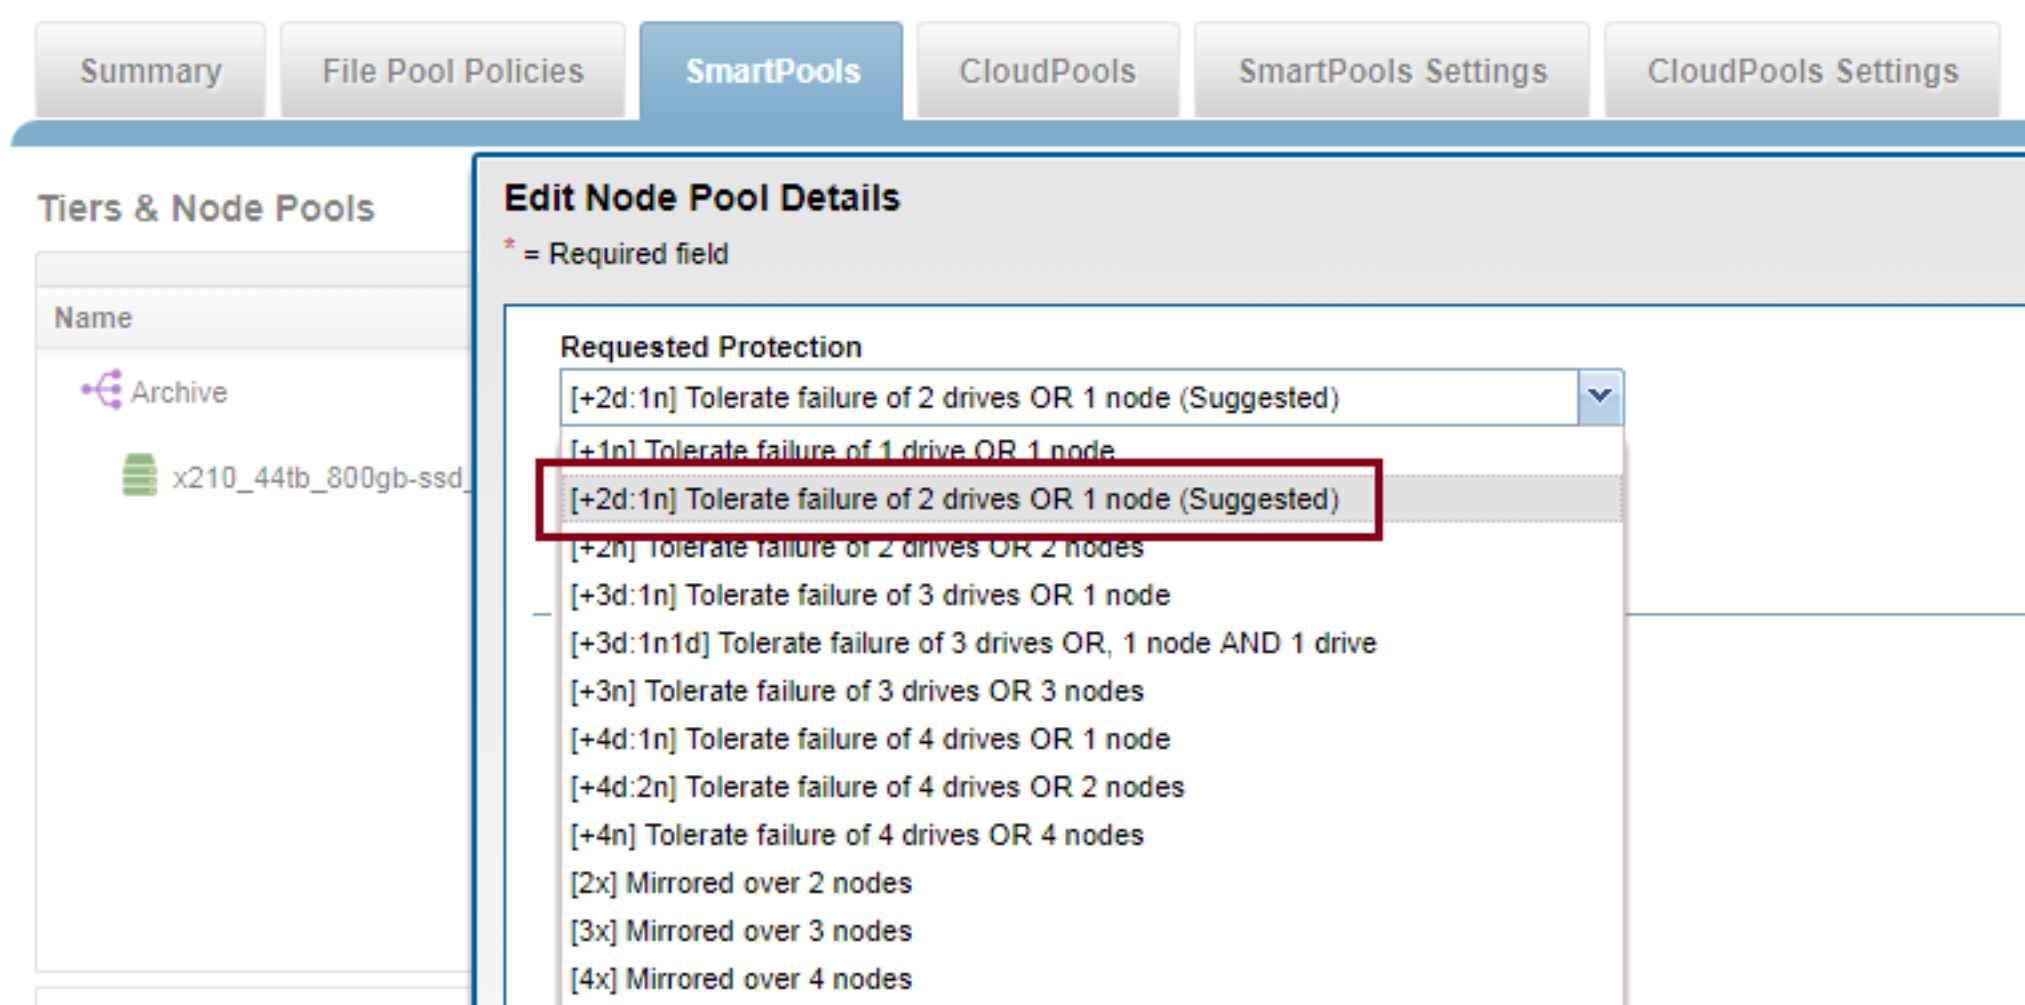 WebUI screenshot showing the OneFS recommended protection level for a node pool - in this case +2d:1n.